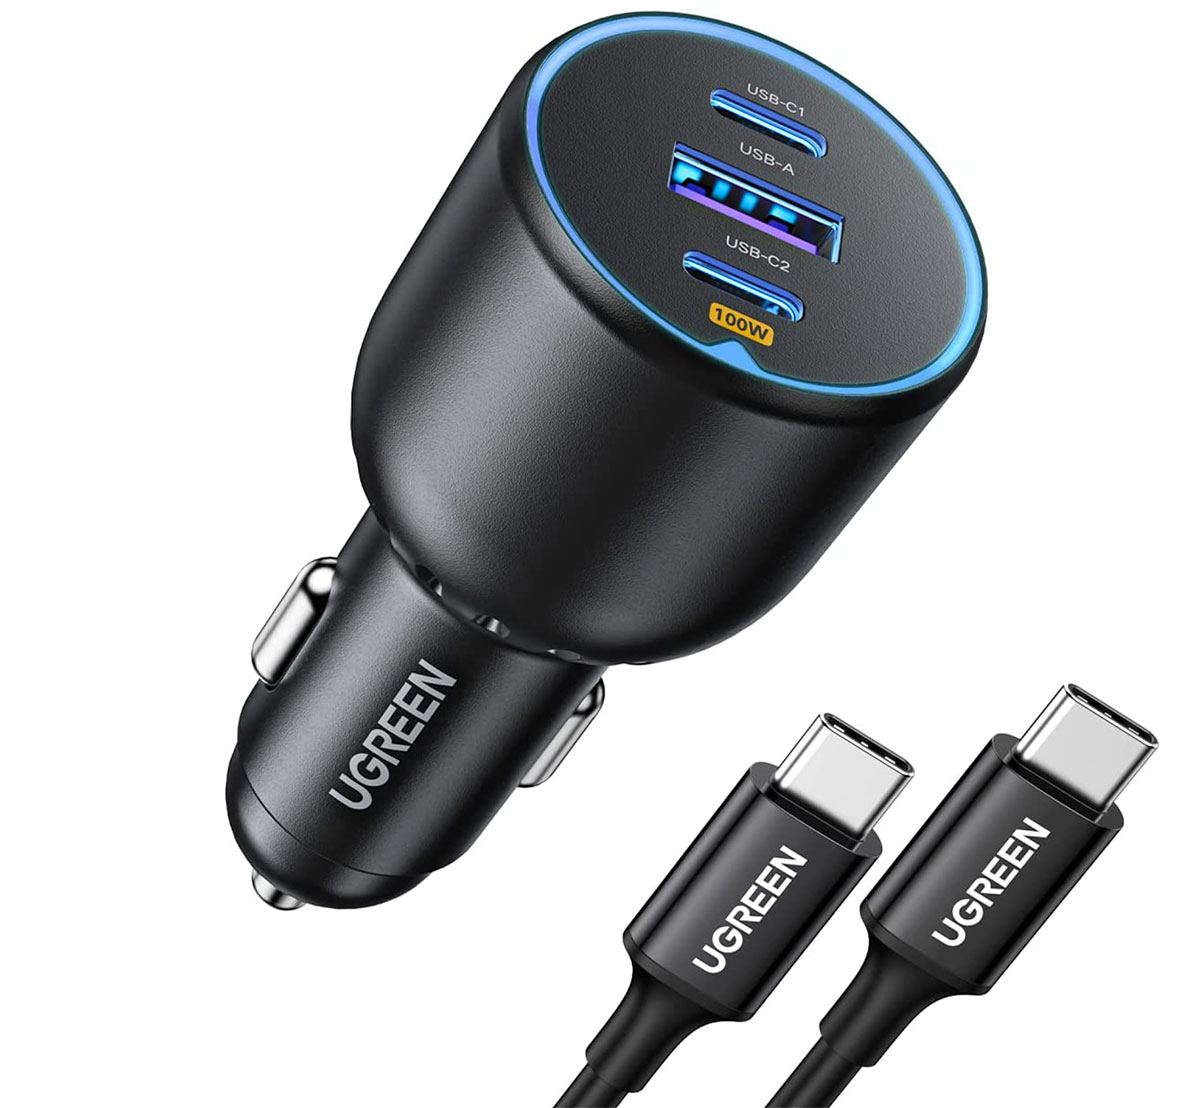 Ugreen 130W USB-C Car Charger - Best 100W in-car laptop charger